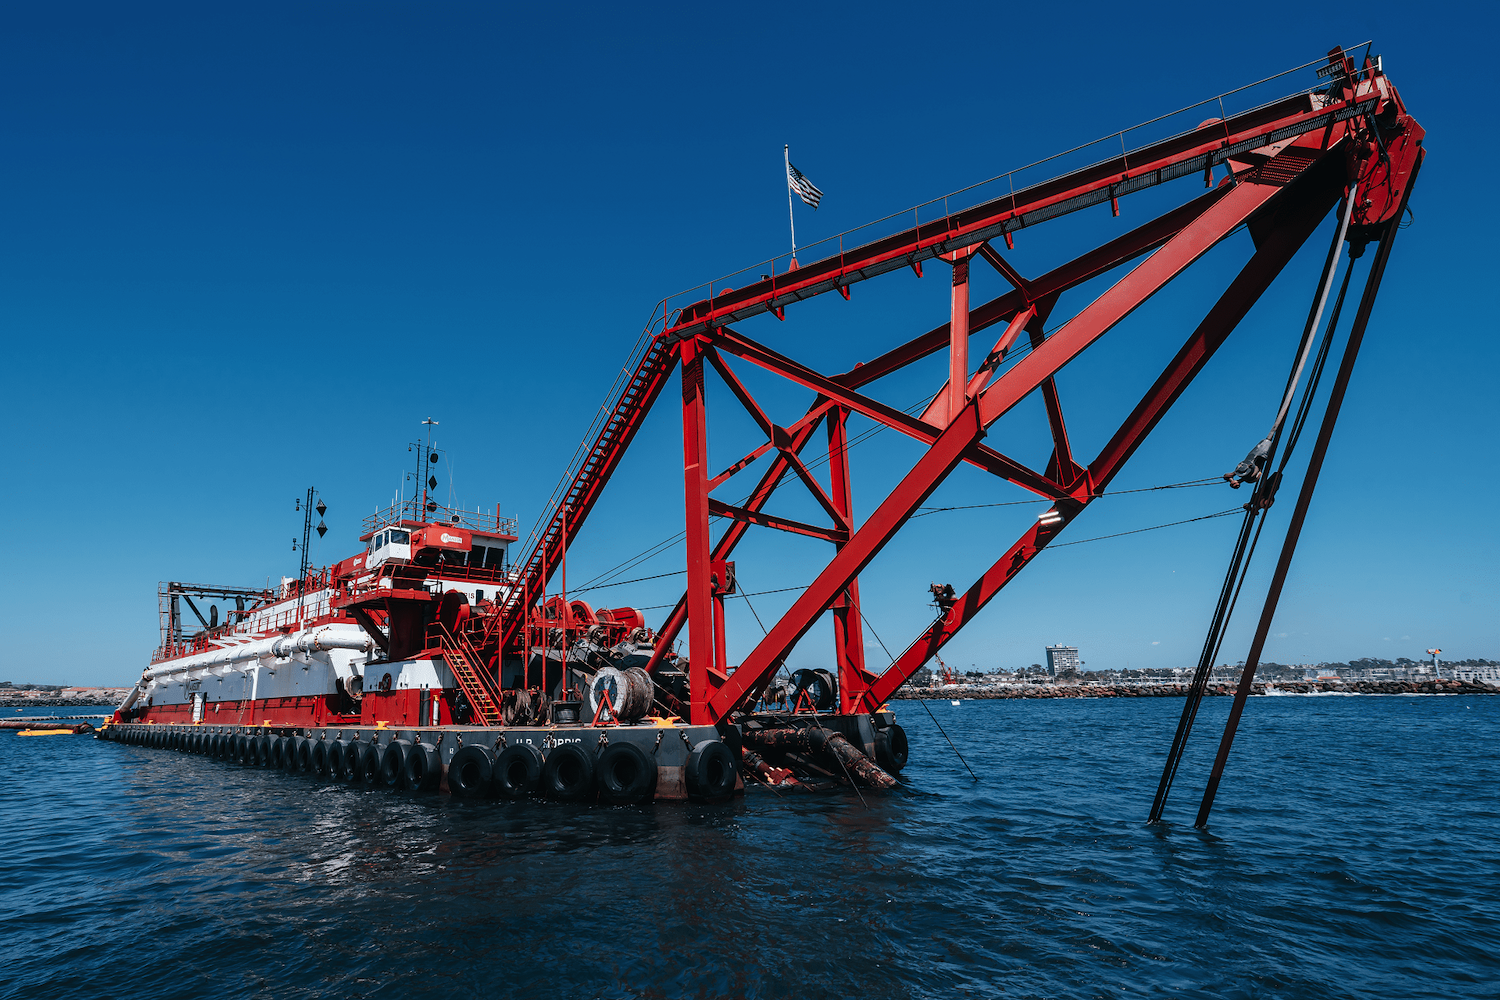 A large red sand dredging ship in San Diego based in Oceanside's harbor helping to compensate for erosion